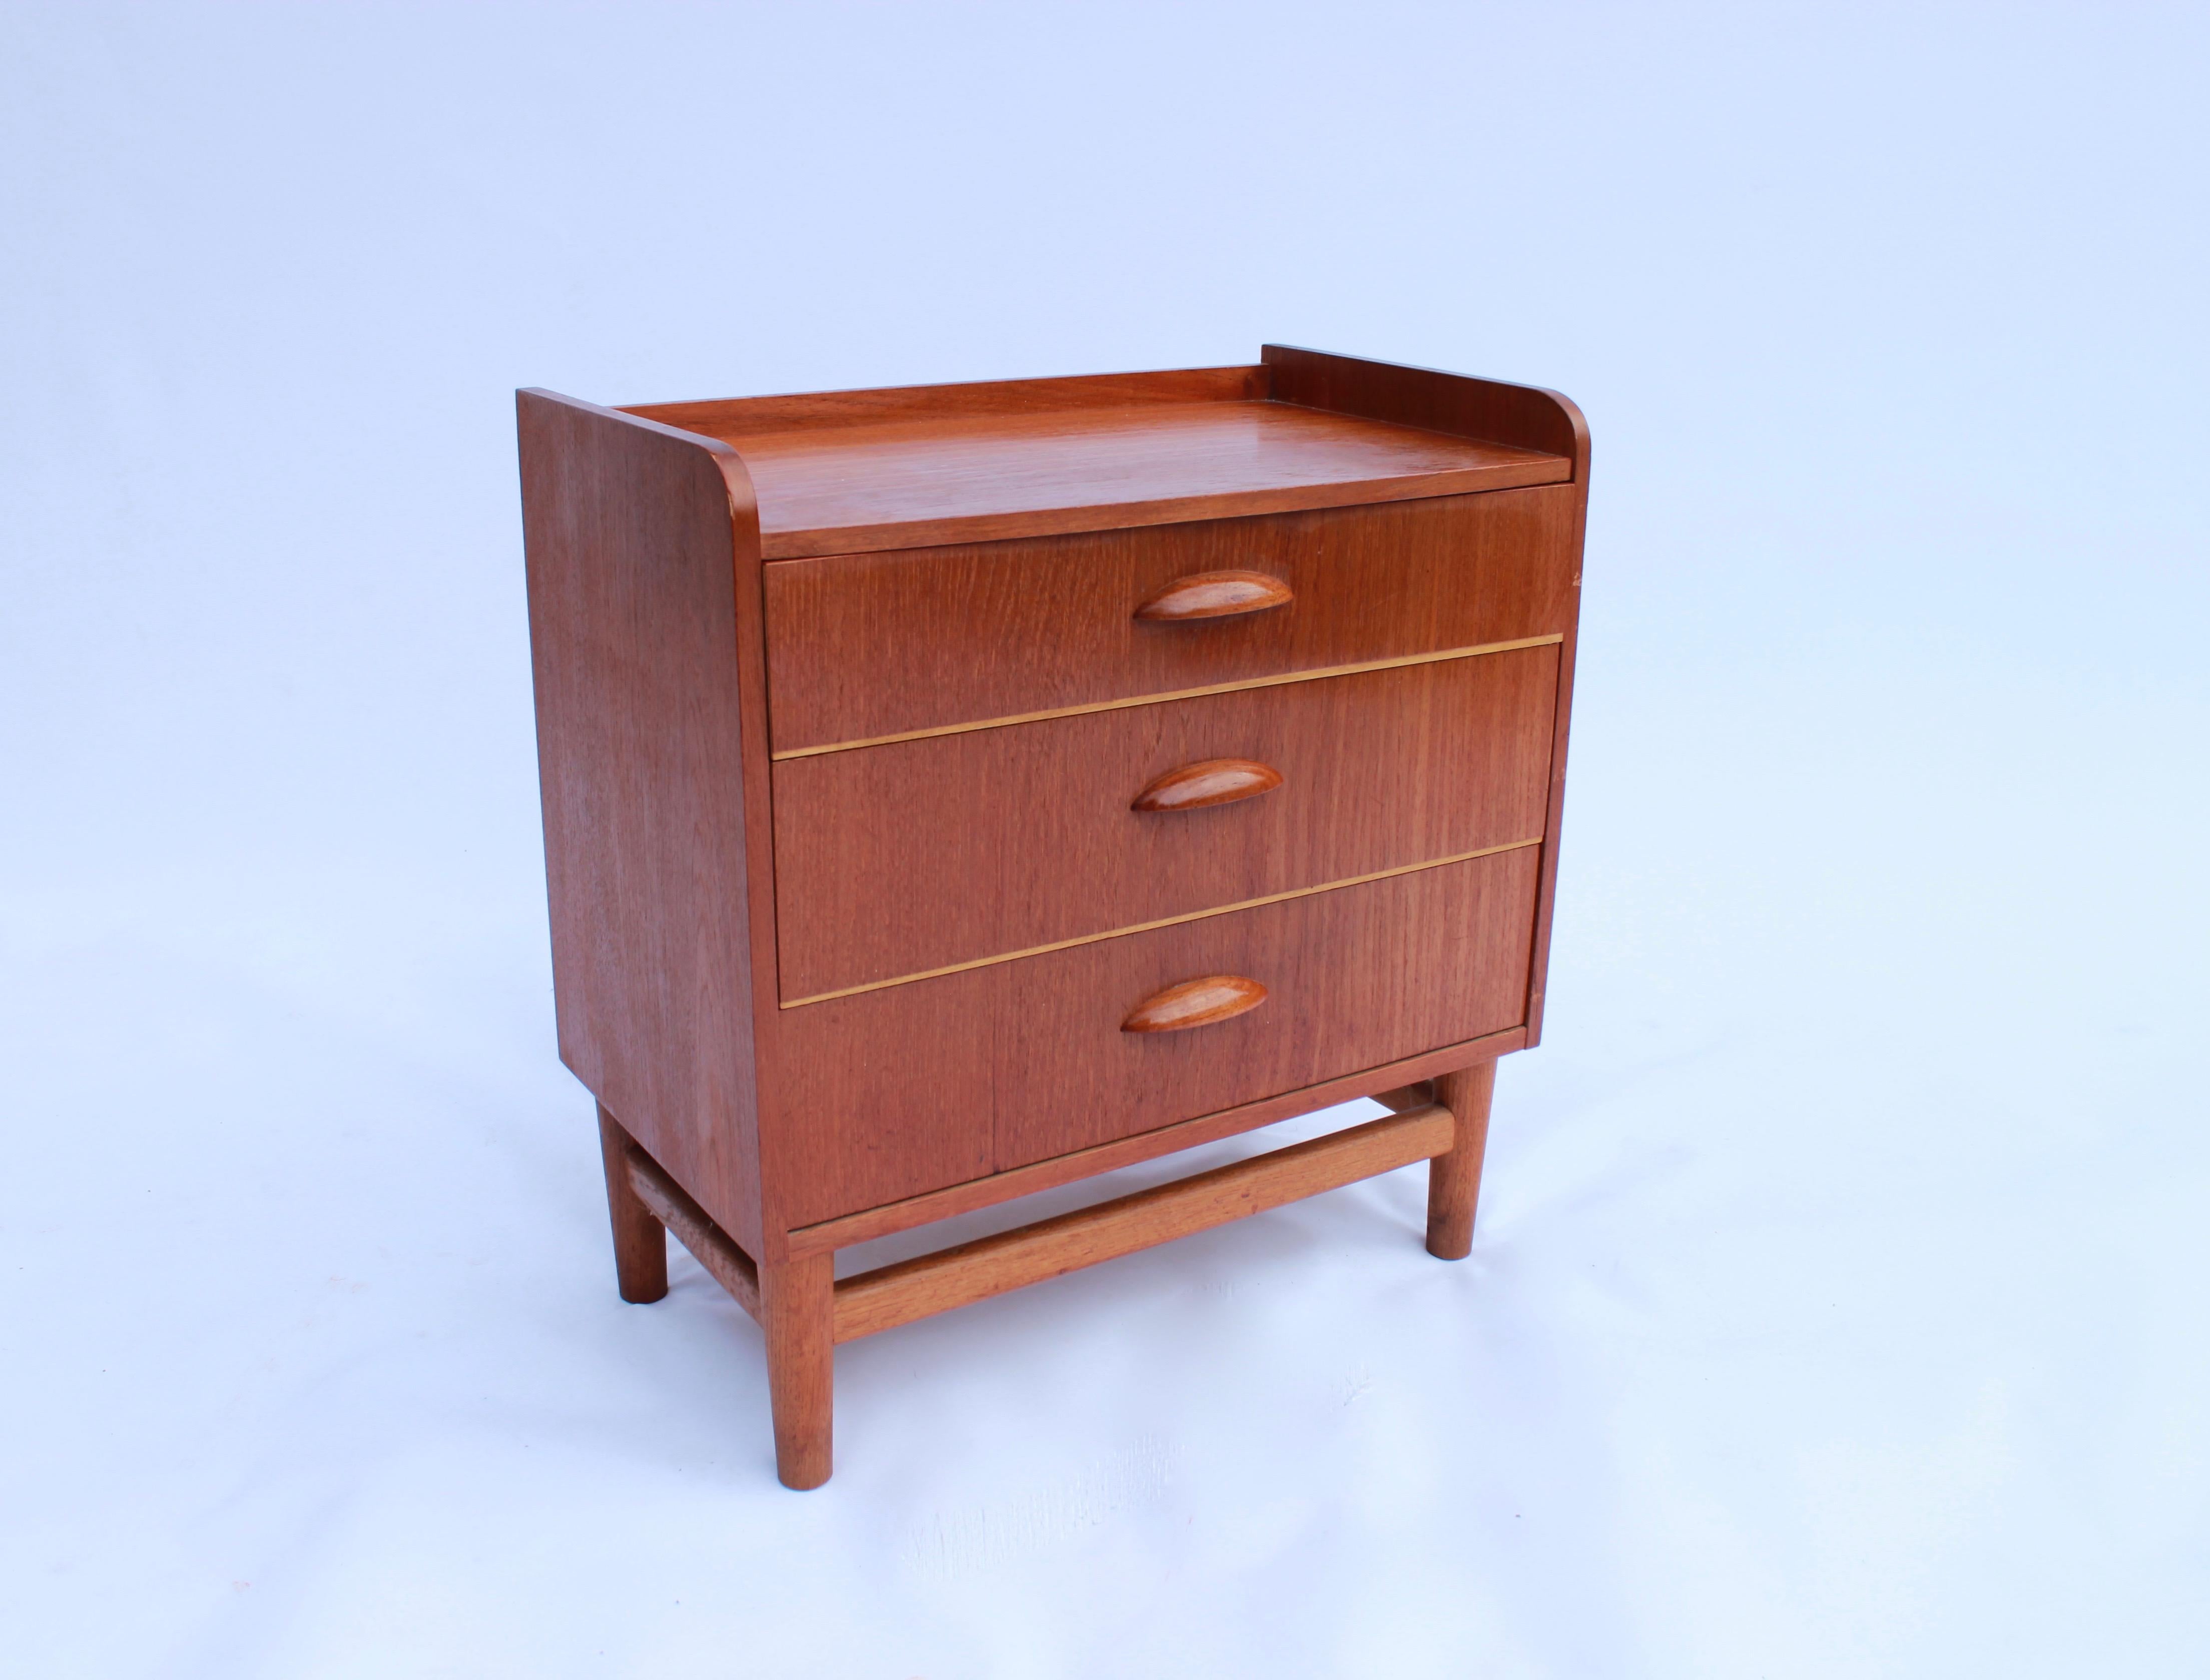 Small chest of drawers in teak of Danish design from the 1960s. The chest is in great vintage condition.